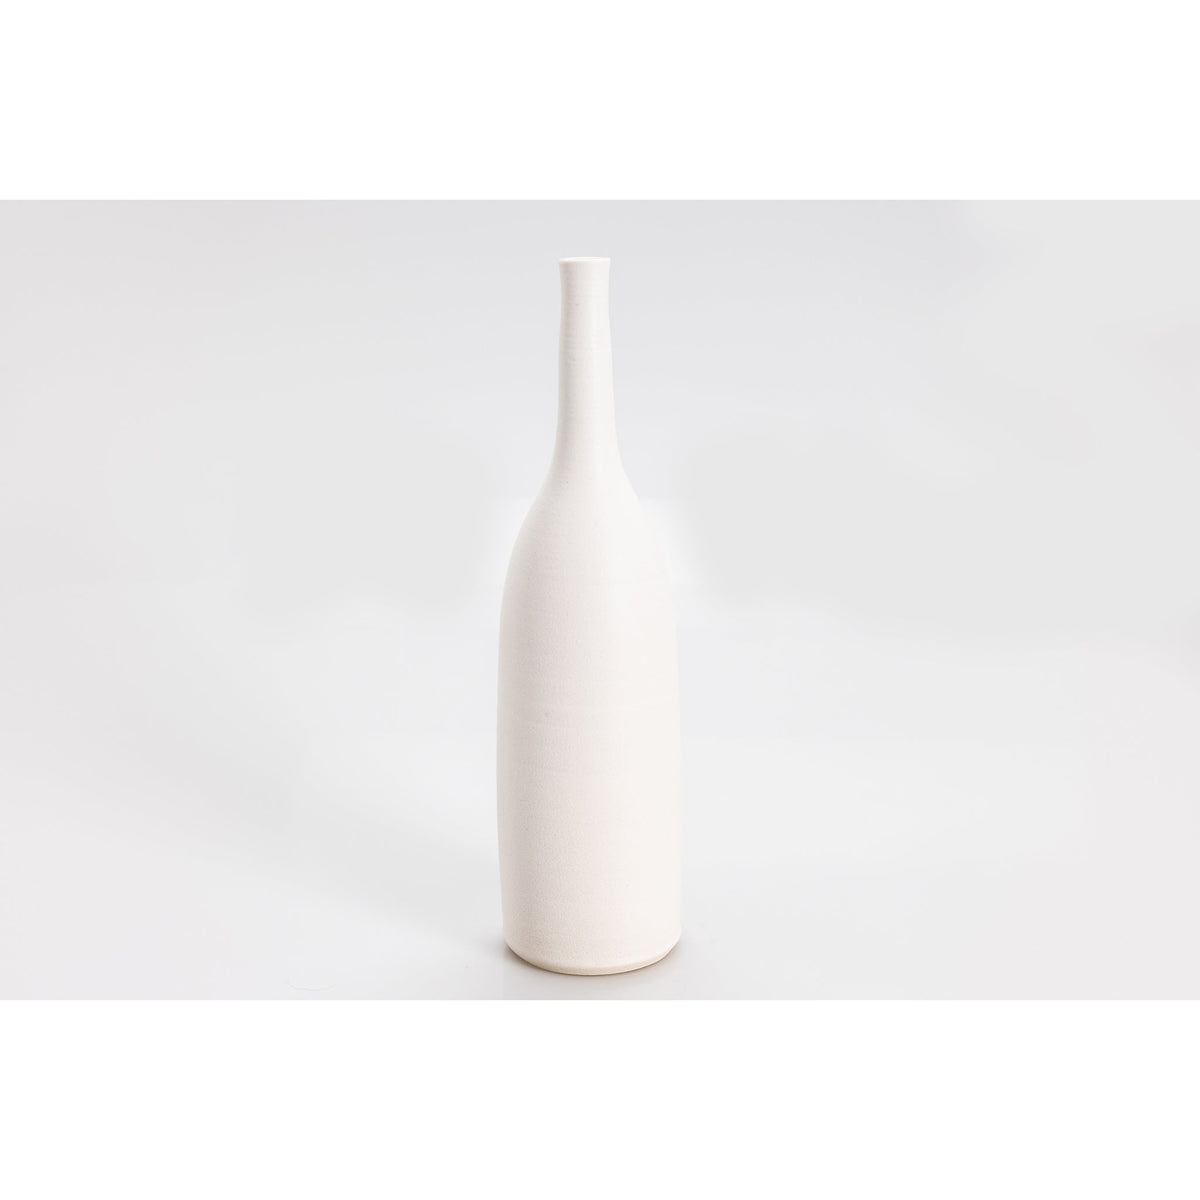 &#39;LB145 Chalk White Bottle&#39; by Lucy Burley ceramics, available at Padstow Gallery, Cornwall